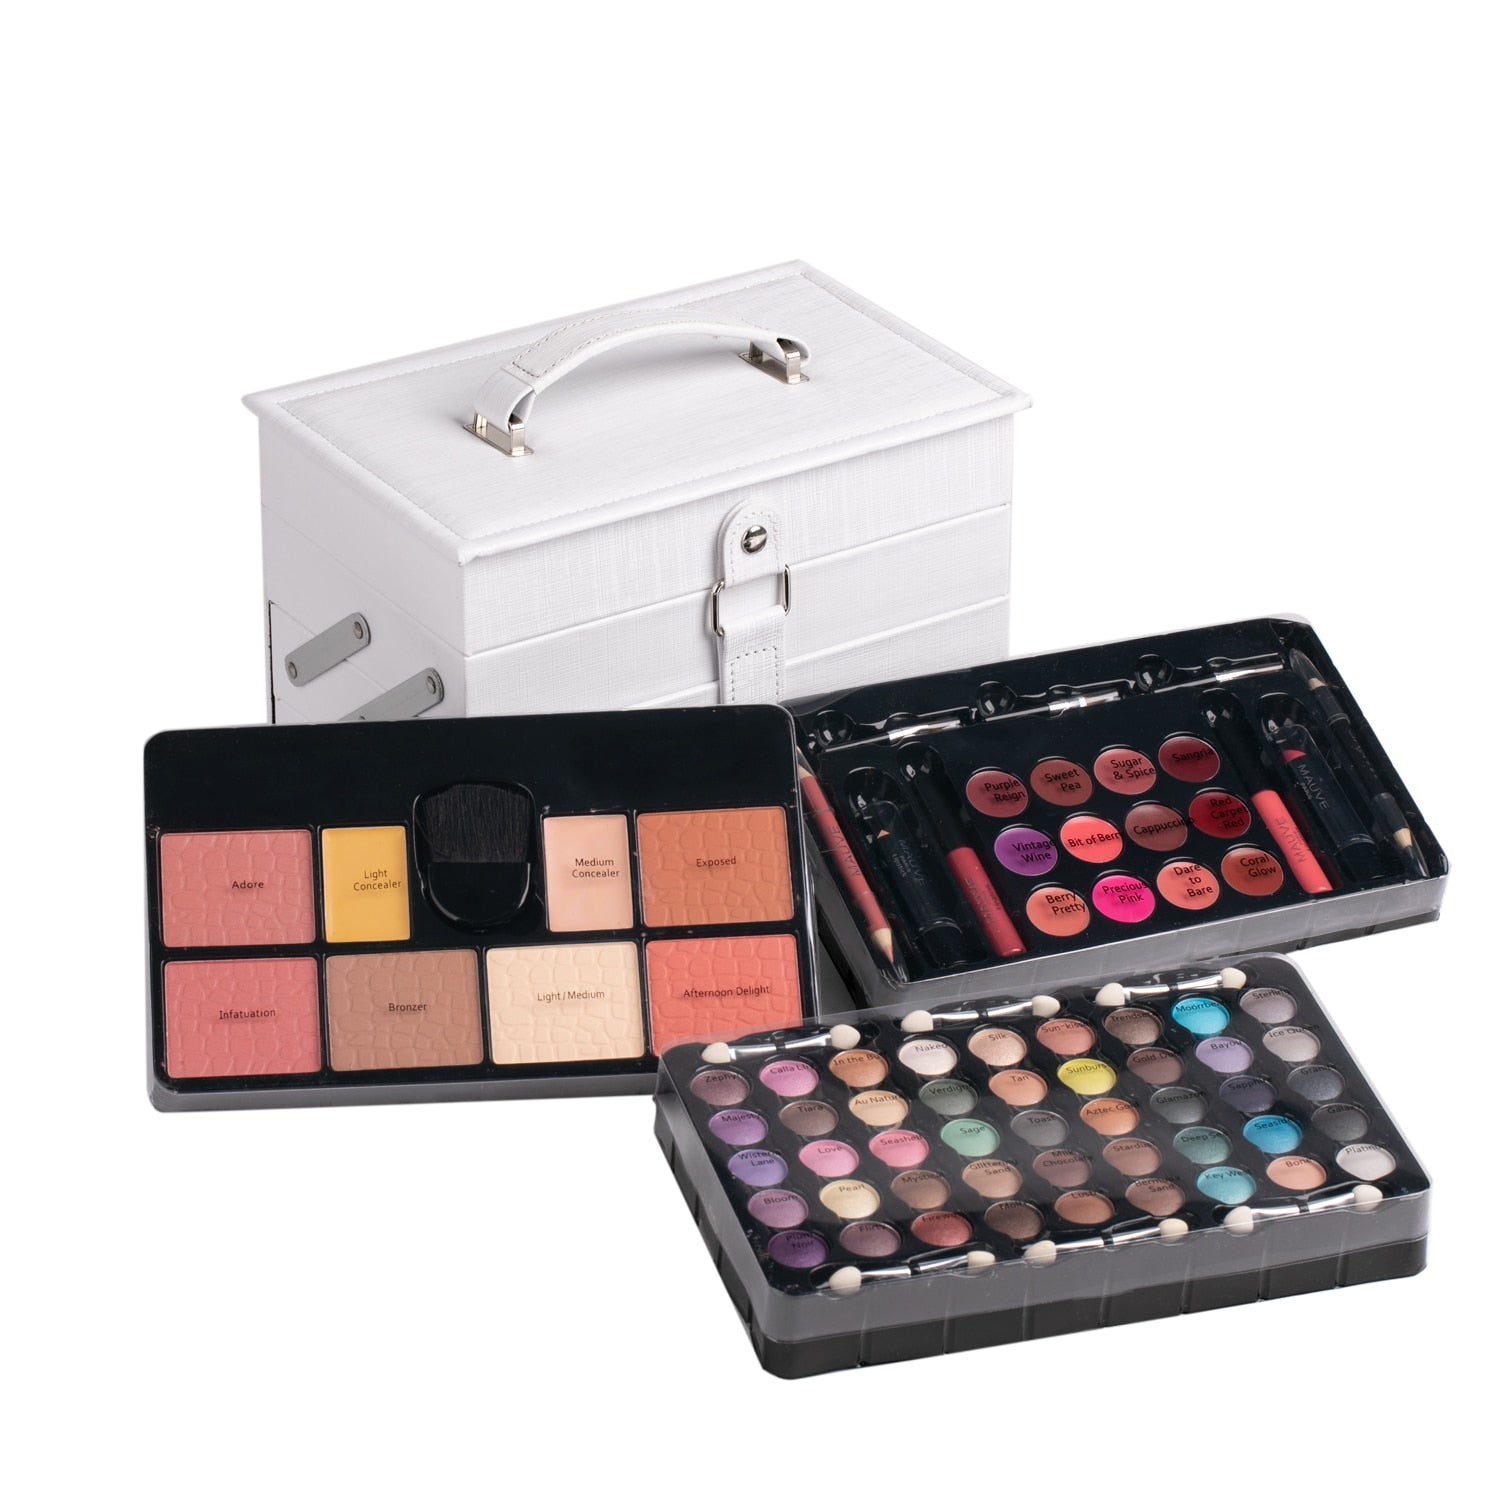 Professional 45 Color Eyeshadow Blush Cosmetic Foundation Face Powder Makeup Sets Eye Shadows Palette